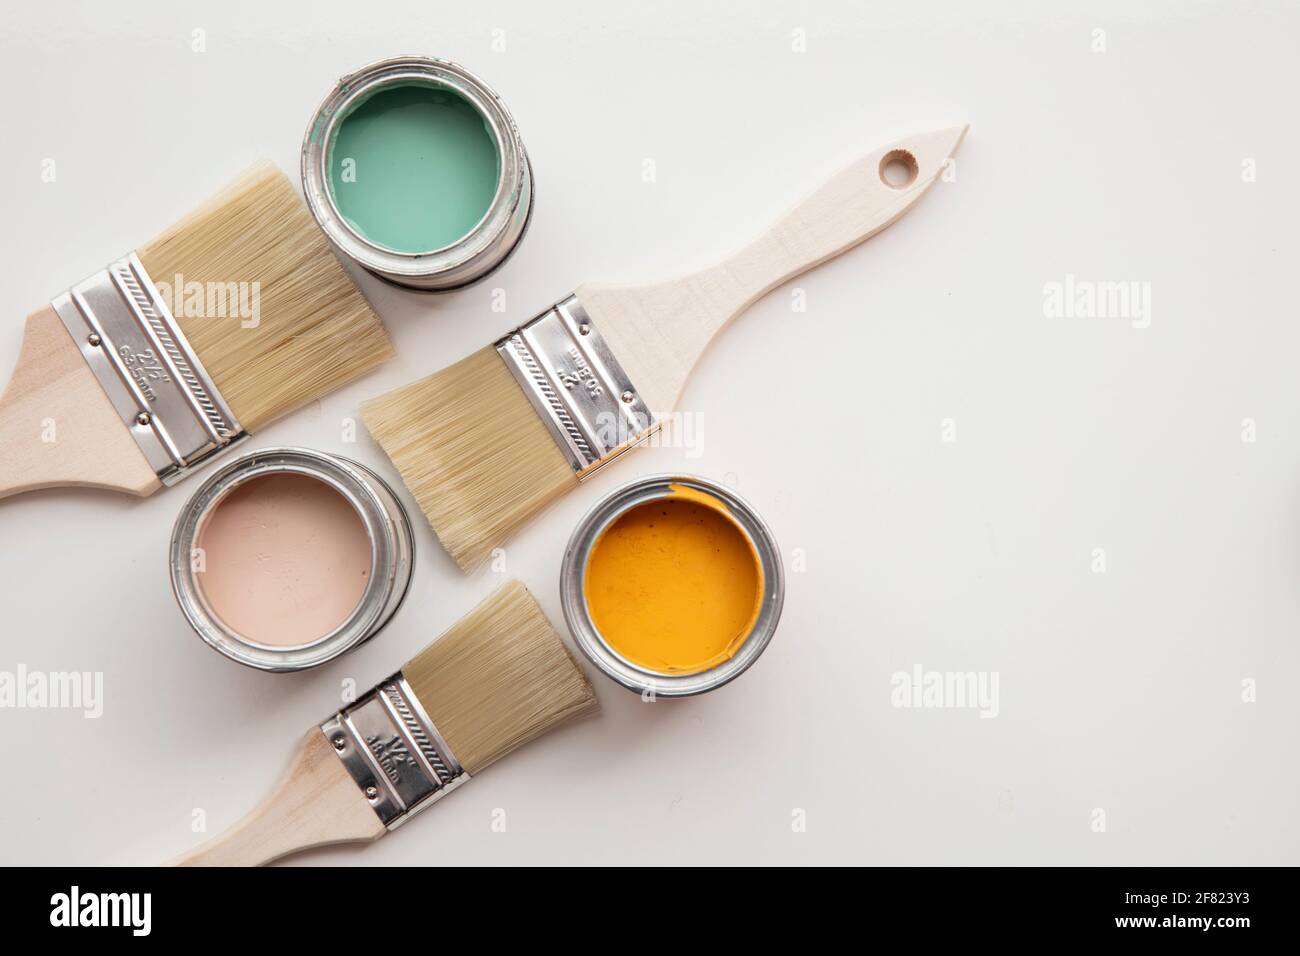 Overhead view of a DIY paint brush with colorful sample paint pots Stock Photo